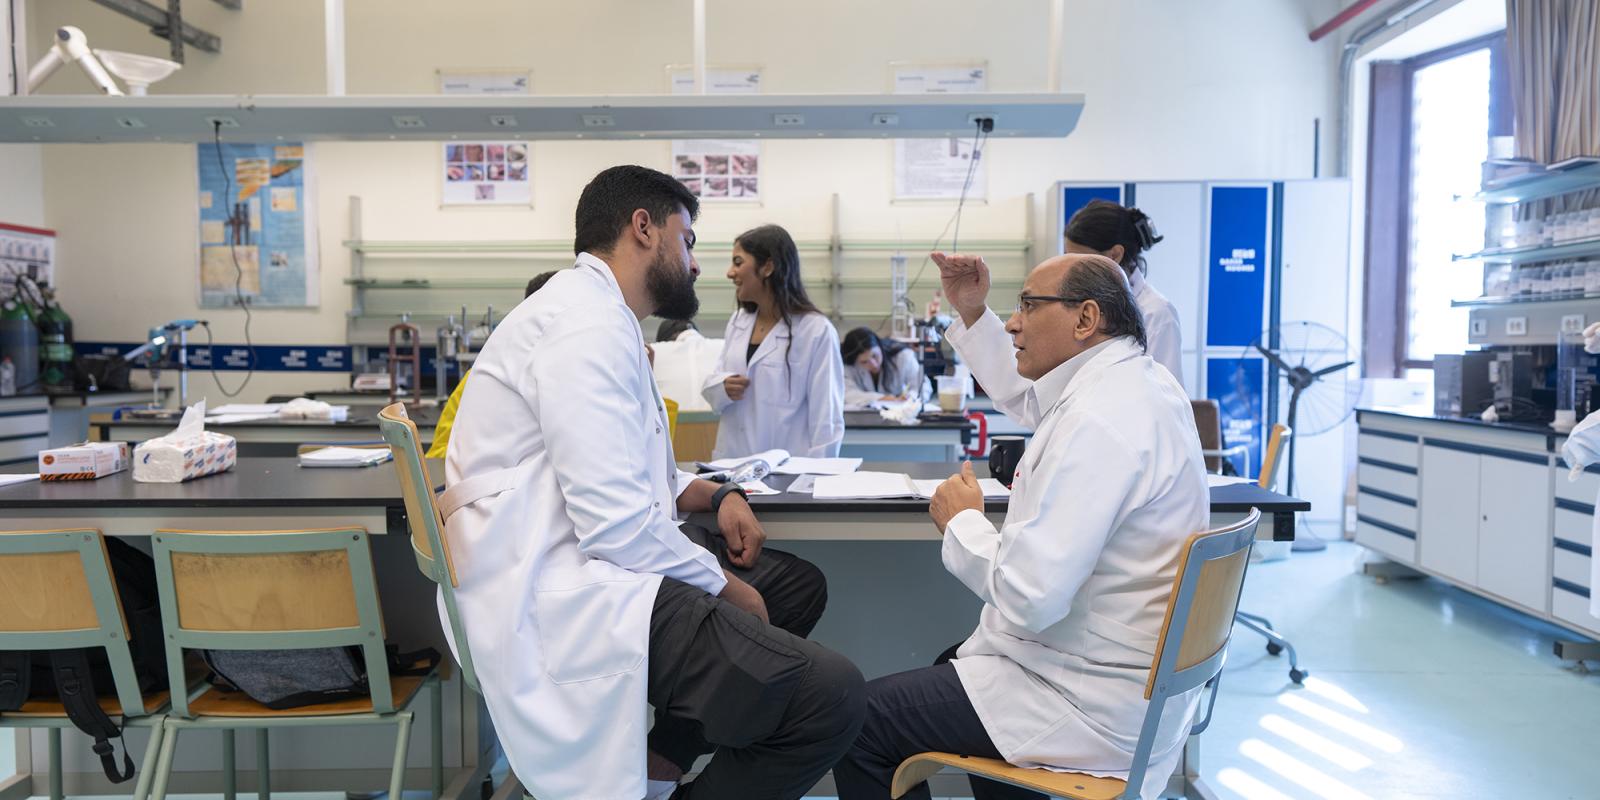 students working in lab wearing white coats